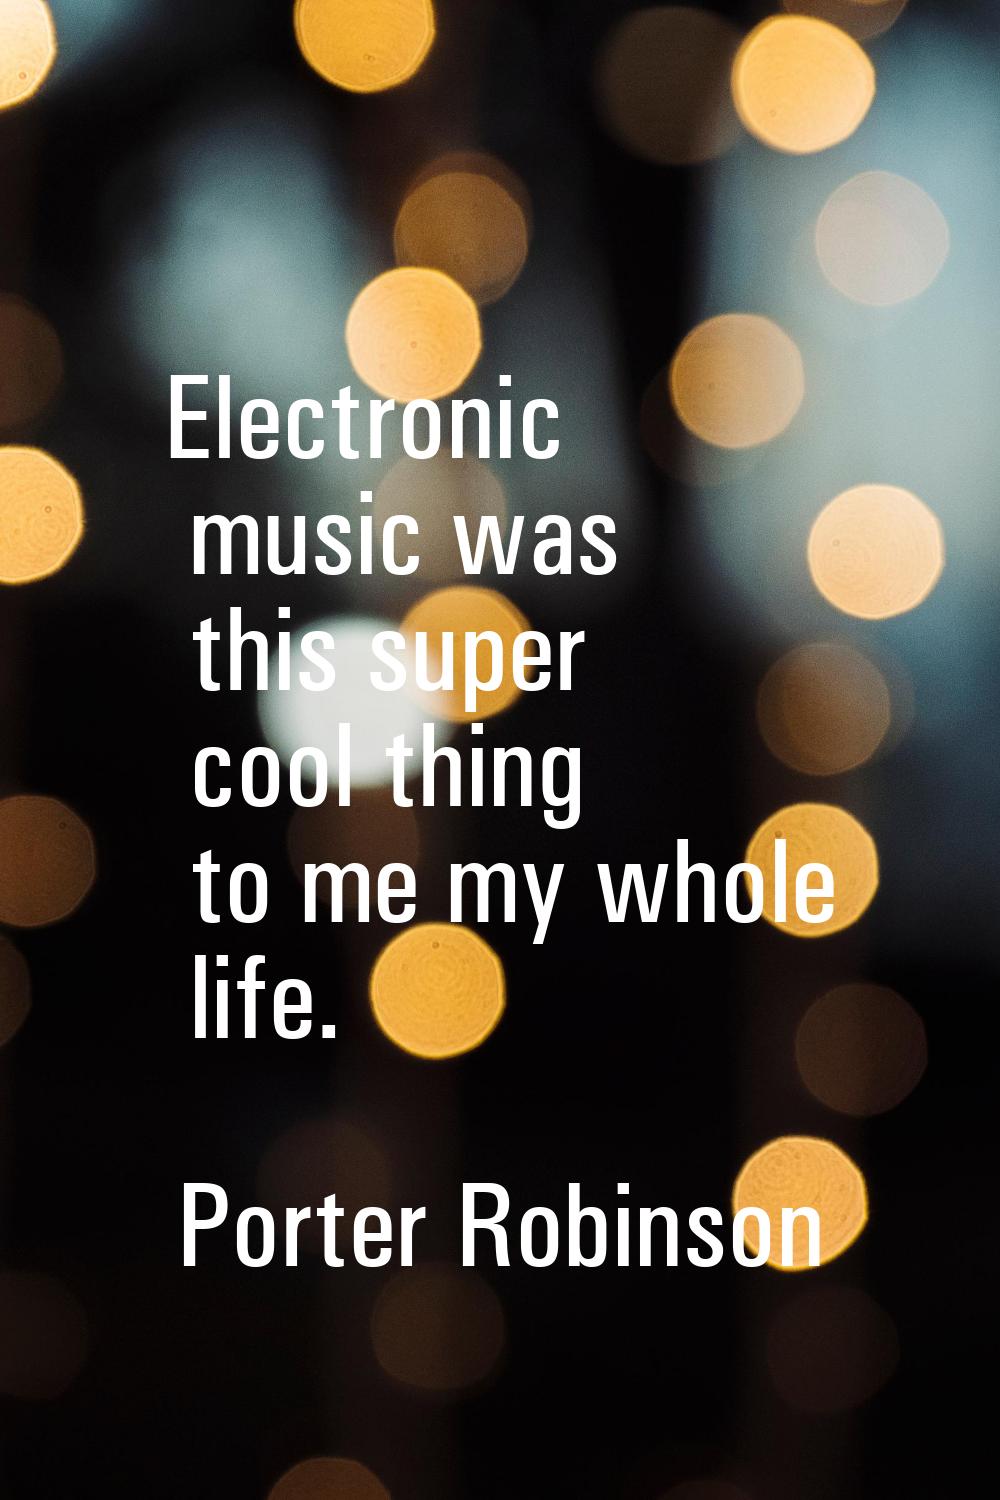 Electronic music was this super cool thing to me my whole life.